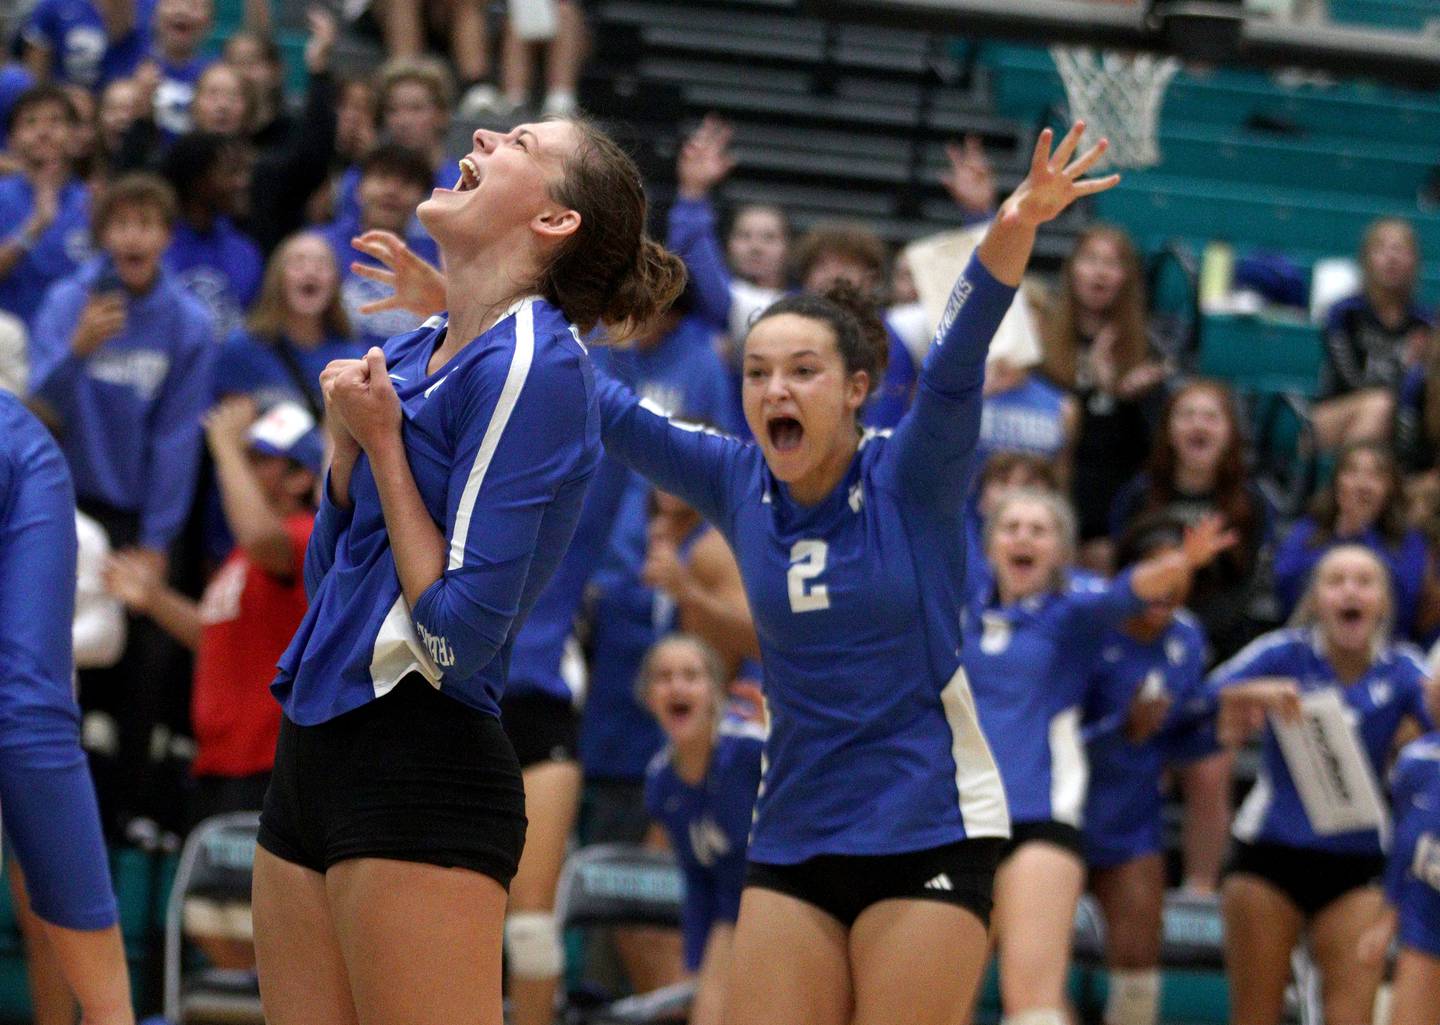 Woodstock’s Hallie Steponaitis, left, enjoys the moment as the final point falls in a two-set win in varsity volleyball at Woodstock North Monday night. Coming in to join the celebration is Ava Sieck, right.